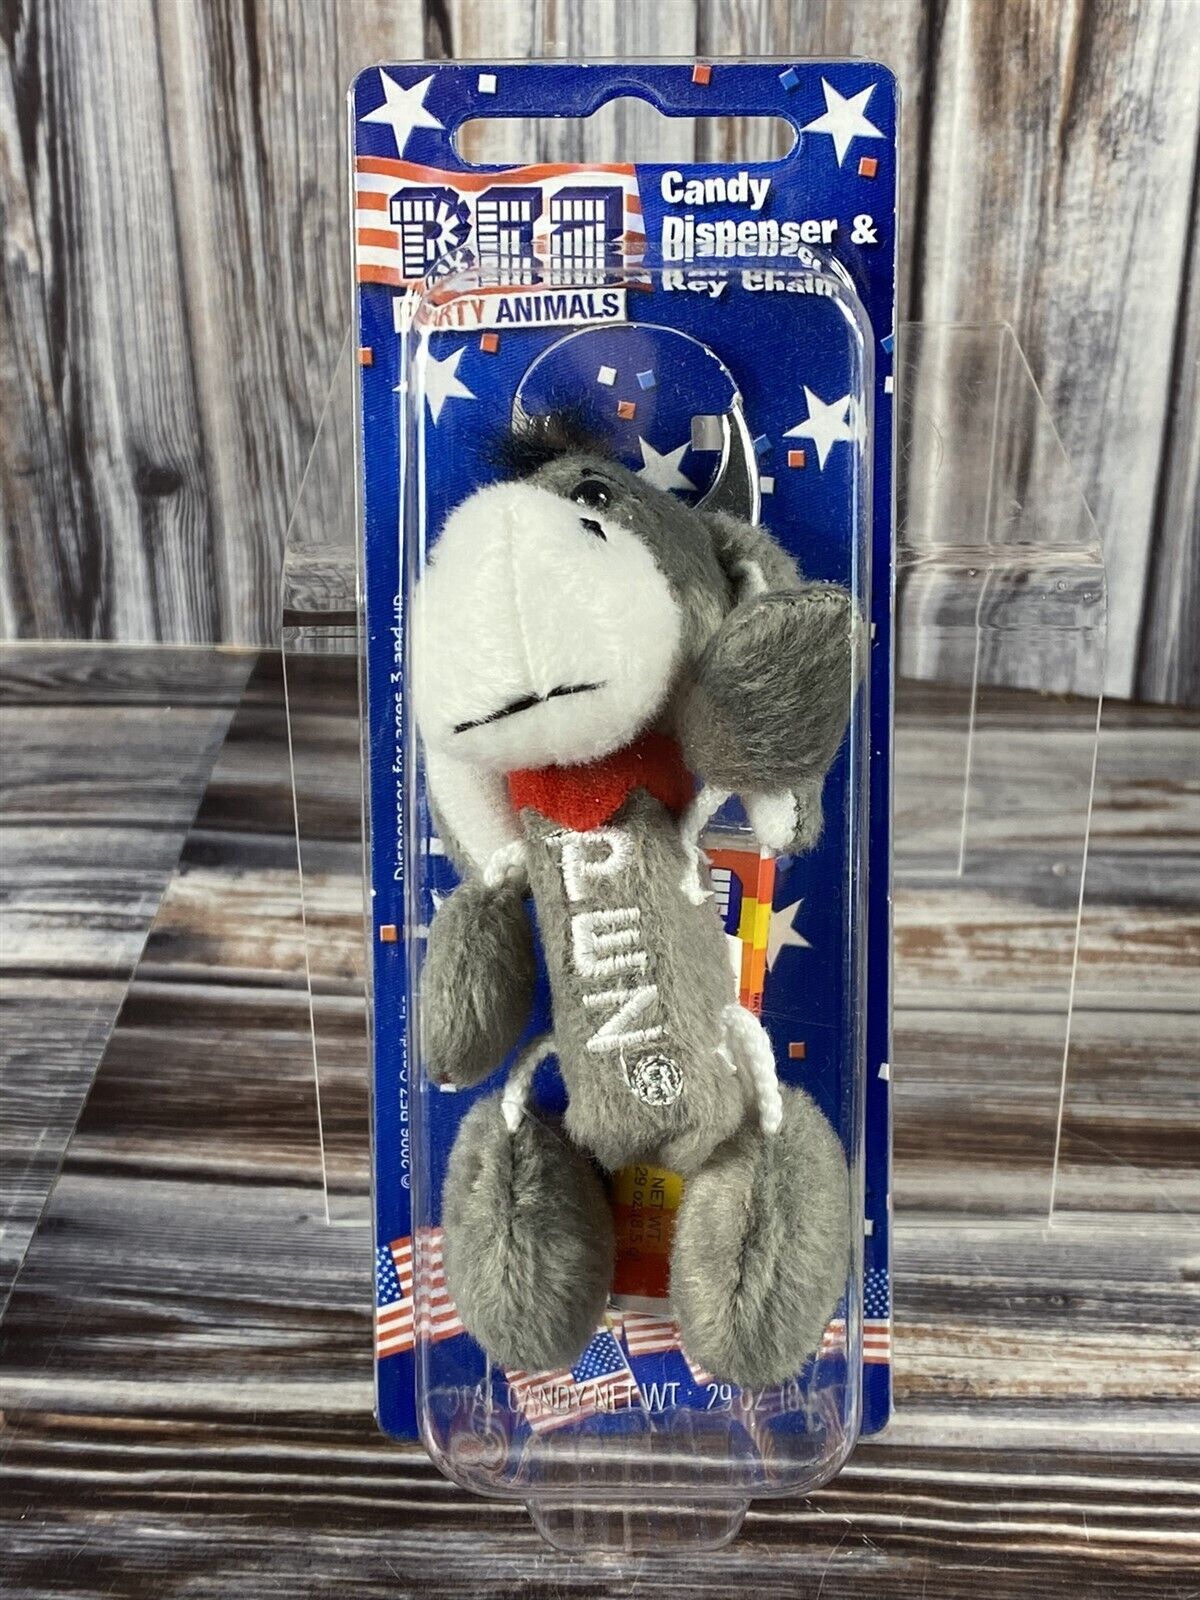 Pez Candy Dispenser Keychain - Party Animals - Democrat Donkey - New in Package - $8.79